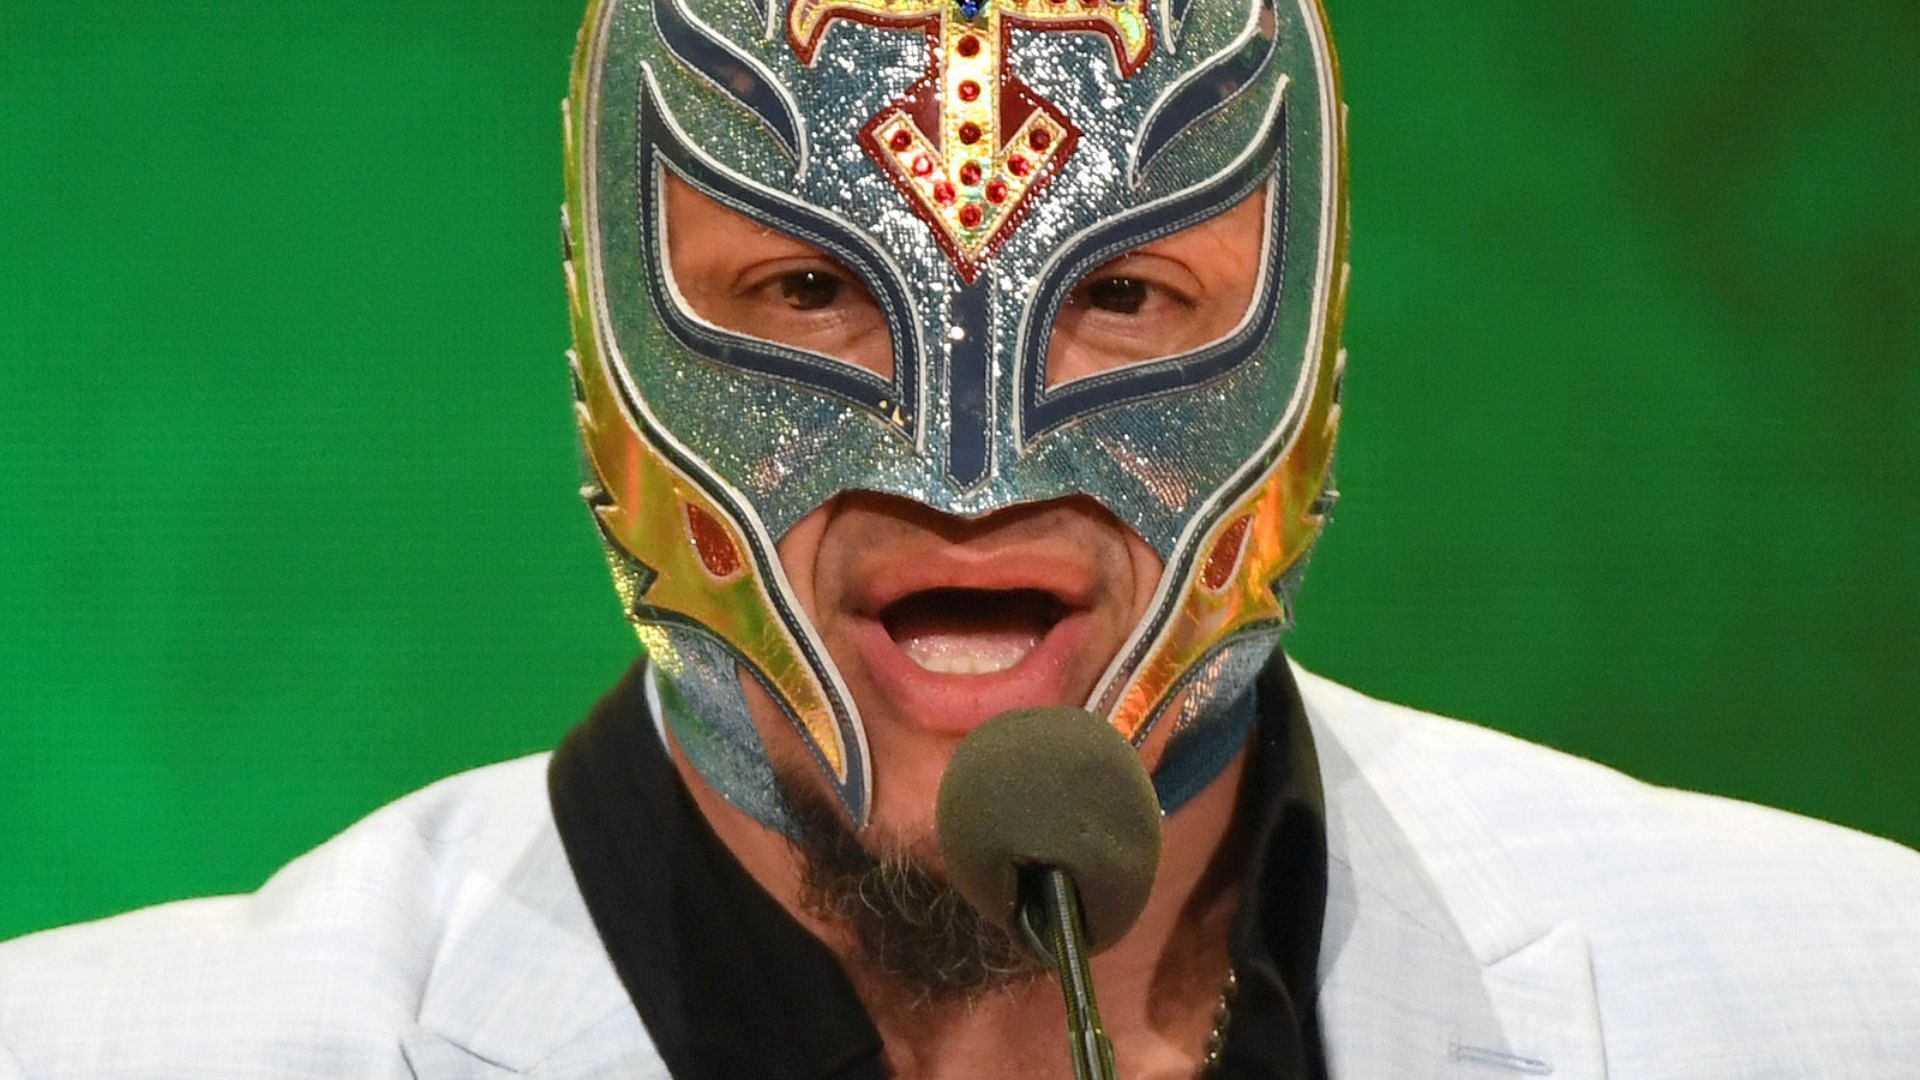 WWE Hall of Famer and current US Champion, Rey Mysterio